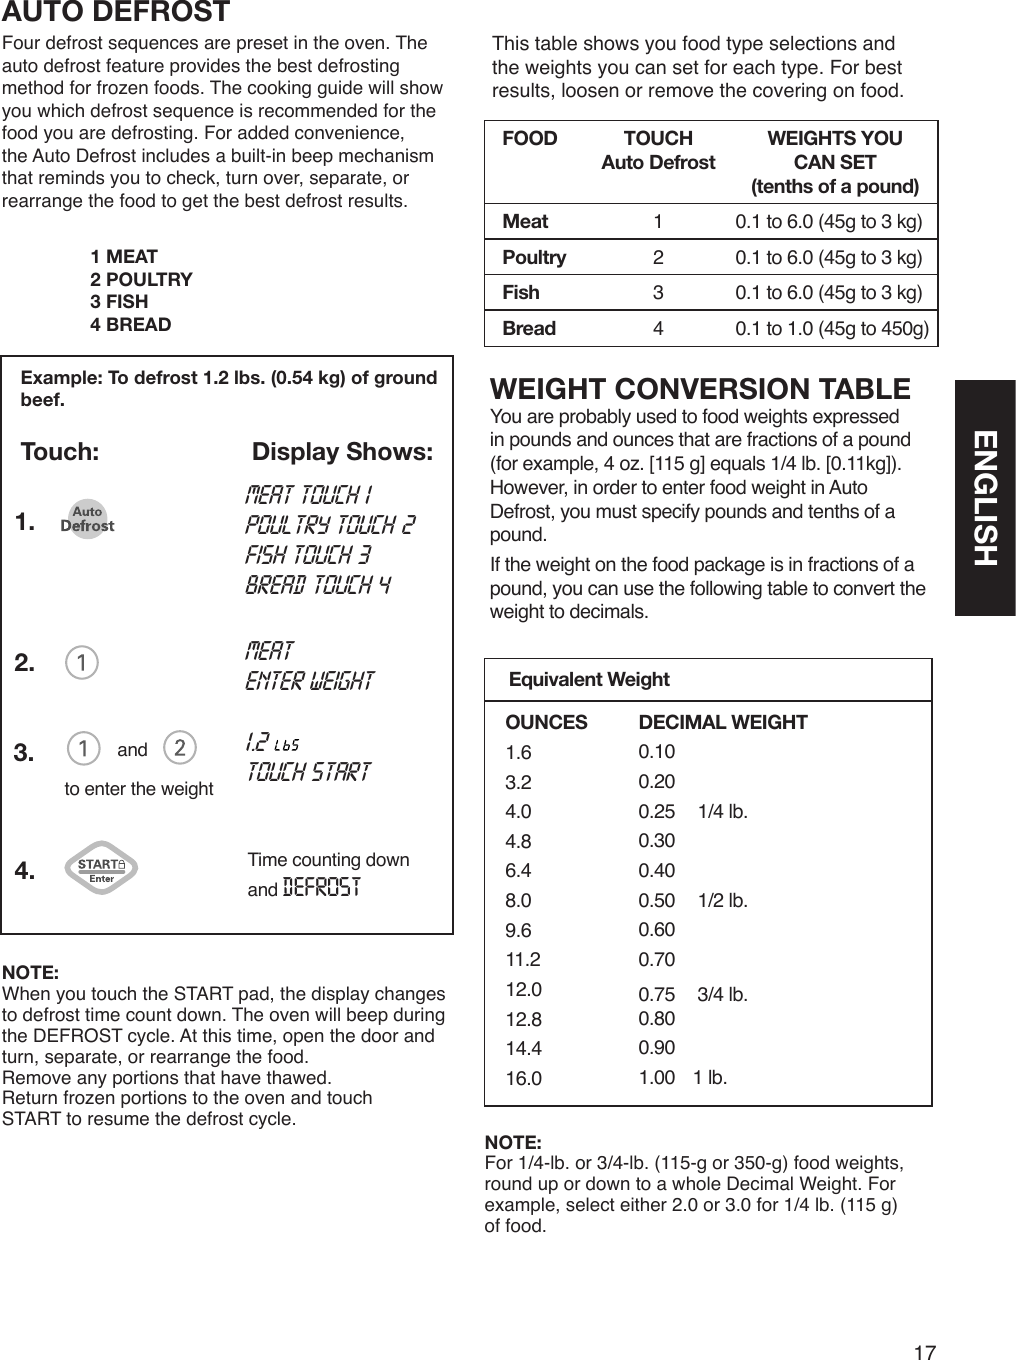 17USING YOUR MICROWAVE OVEN  WEIGHT CONVERSION TABLEYou are probably used to food weights expressed in pounds and ounces that are fractions of a pound (for example, 4 oz. [115 g] equals 1/4 lb. [0.11kg]). However, in order to enter food weight in Auto Defrost, you must specify pounds and tenths of a pound.If the weight on the food package is in fractions of a pound, you can use the following table to convert the weight to decimals.This table shows you food type selections and the weights you can set for each type. For best results, loosen or remove the covering on food. OUNCES1.63.24.04.86.48.09.611.212.012.814.416.0 DECIMAL WEIGHT 0.10 0.20 0.25   1/4 lb. 0.30 0.40 0.50   1/2 lb.  0.60 0.70 0.75   3/4 lb.  0.80 0.90 1.00  1 lb. Equivalent WeightFOODMeatPoultryFishBreadTOUCH  Auto Defrost  1234WEIGHTS YOU  CAN SET  (tenths of a pound)0.1 to 6.0 (45g to 3 kg)0.1 to 6.0 (45g to 3 kg)0.1 to 6.0 (45g to 3 kg)0.1 to 1.0 (45g to 450g)Example: To defrost 1.2 lbs. (0.54 kg) of ground beef.Touch:  Display Shows:AUTO DEFROSTFour defrost sequences are preset in the oven. The auto defrost feature provides the best defrosting method for frozen foods. The cooking guide will show you which defrost sequence is recommended for the food you are defrosting. For added convenience, the Auto Defrost includes a built-in beep mechanism that reminds you to check, turn over, separate, or rearrange the food to get the best defrost results.  1 MEAT2 POULTRY3 FISH4 BREADNOTE:When you touch the START pad, the display changesto defrost time count down. The oven will beep duringthe DEFROST cycle. At this time, open the door andturn, separate, or rearrange the food.Remove any portions that have thawed.Return frozen portions to the oven and touchSTART to resume the defrost cycle.1.2.3. and4. Time counting down and DEFROSTto enter the weightmeat touch 1poultry touch 2fish touch 3bread touch 4meatenter weight1.2touch startNOTE:For 1/4-lb. or 3/4-lb. (115-g or 350-g) food weights, round up or down to a whole Decimal Weight. For example, select either 2.0 or 3.0 for 1/4 lb. (115 g)  of food.ENGLISH